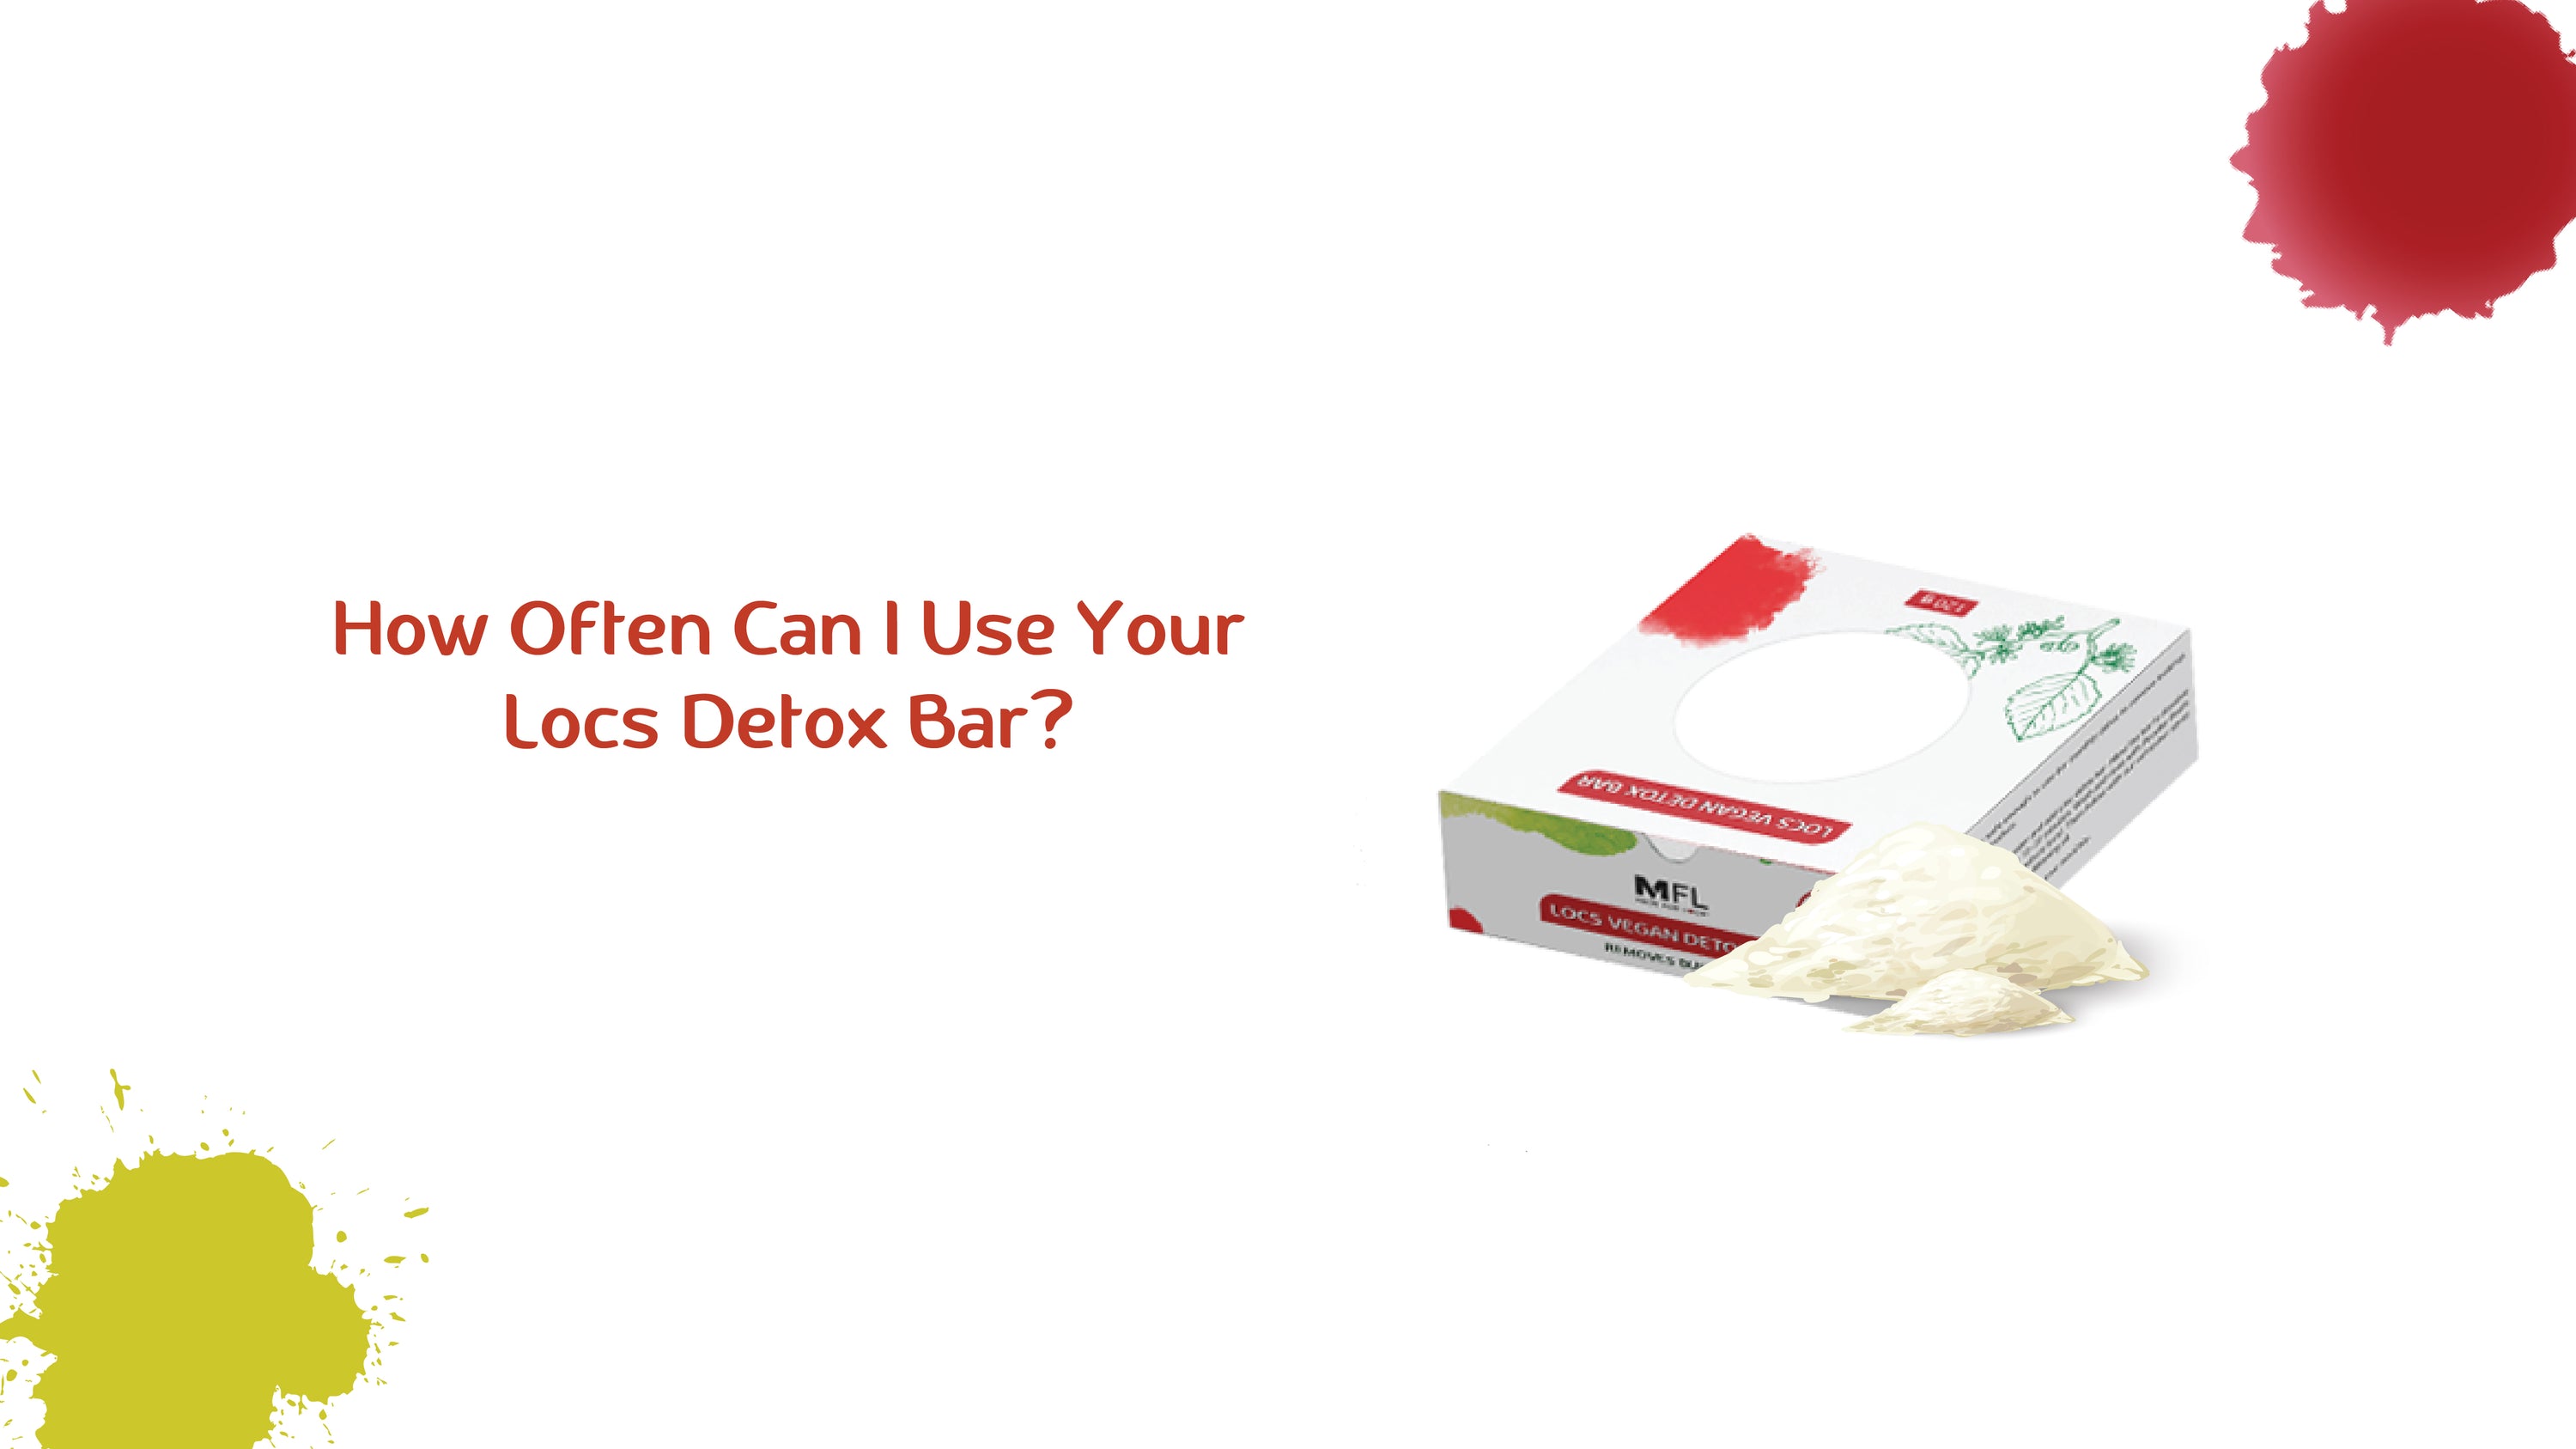 How Often Can I Use Your Locs Detox Bar?